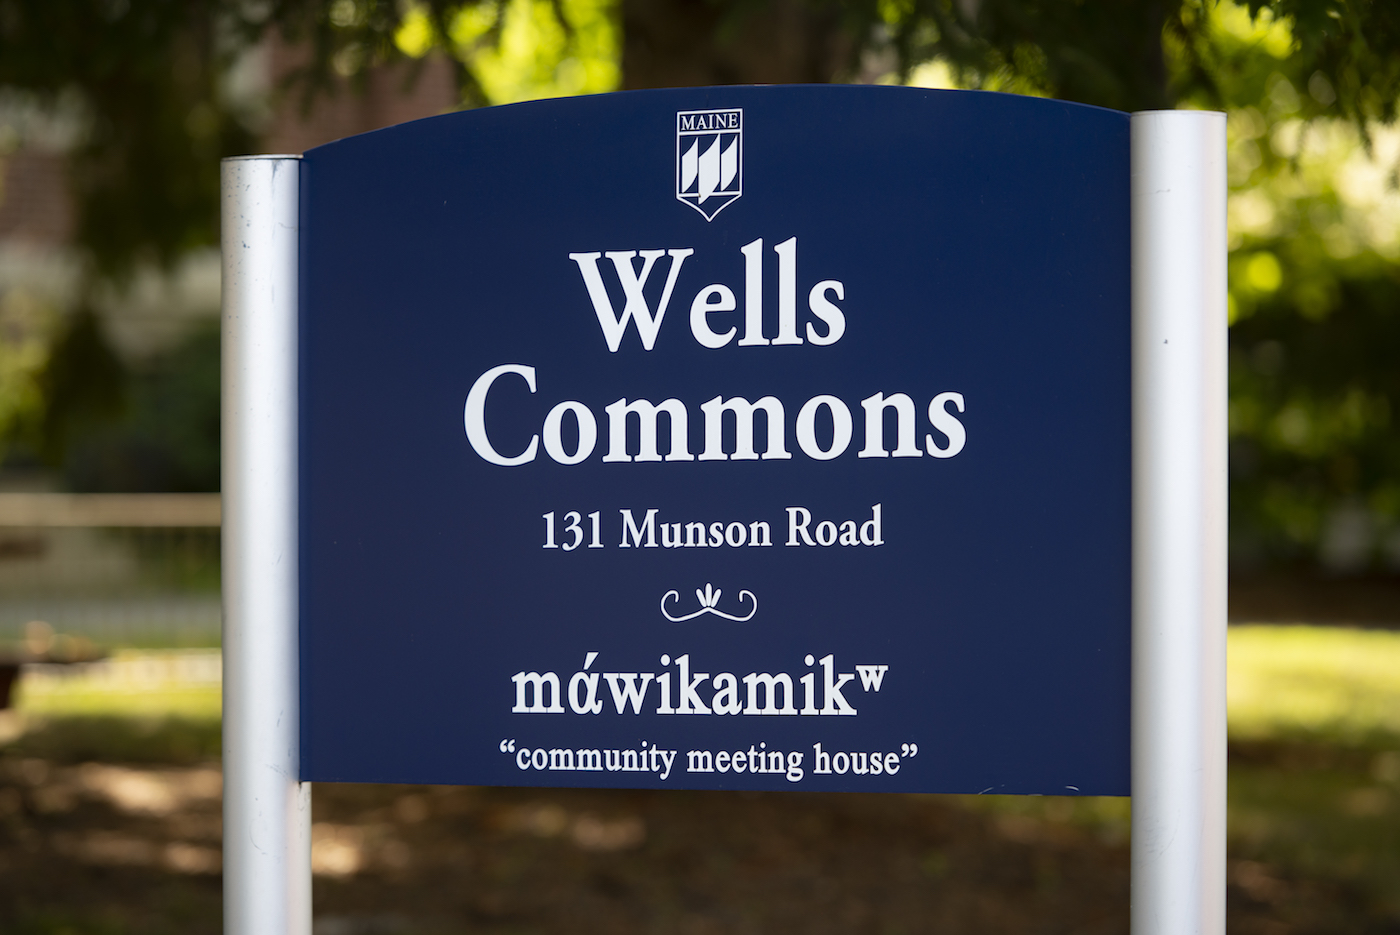 A photo of the Wells Commons signs